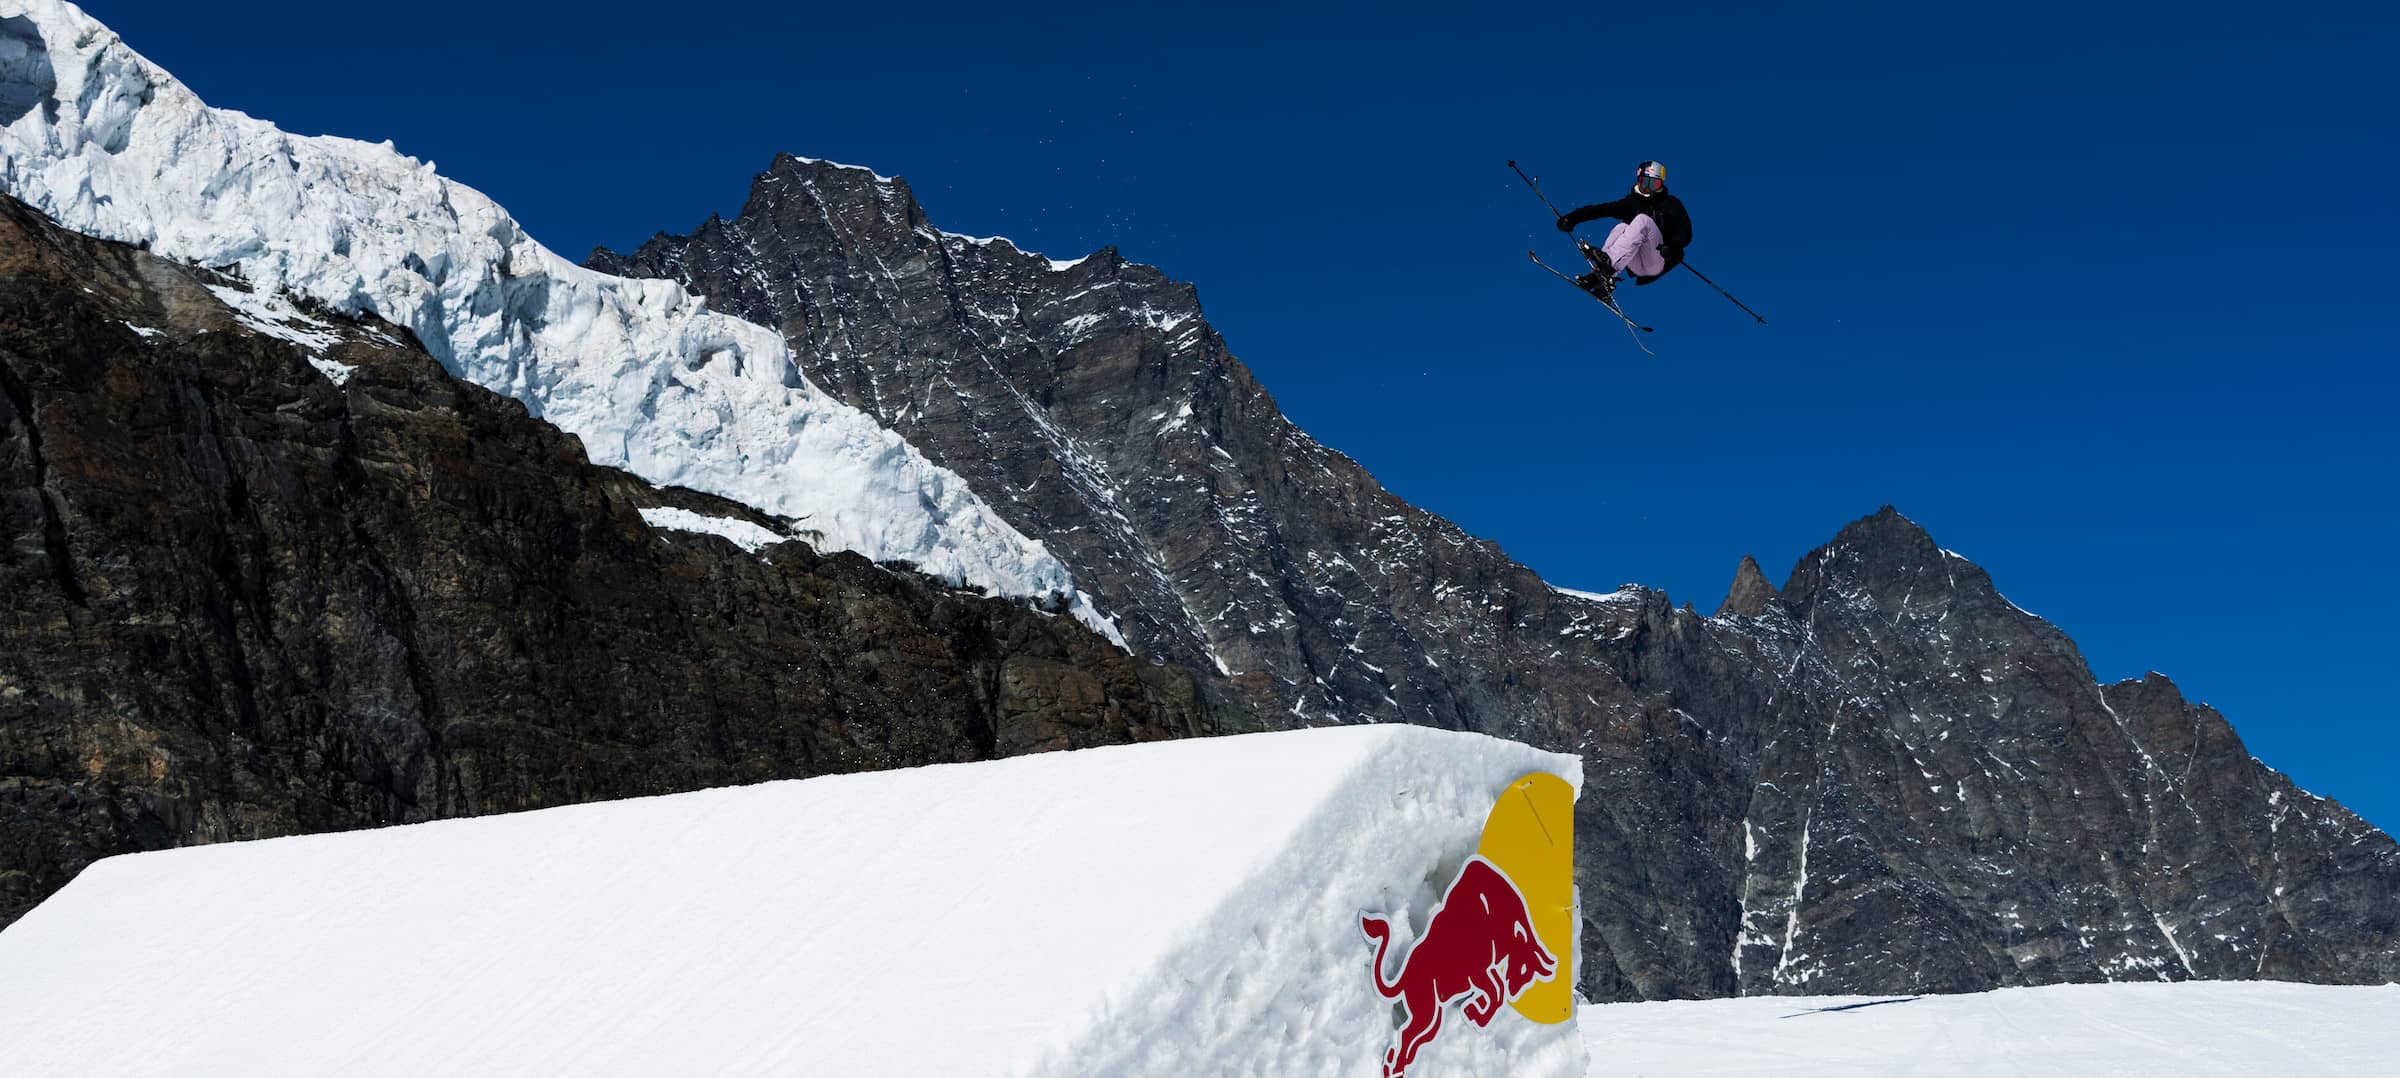 Ess ledeux performs at the red bull performance camp in saas fee